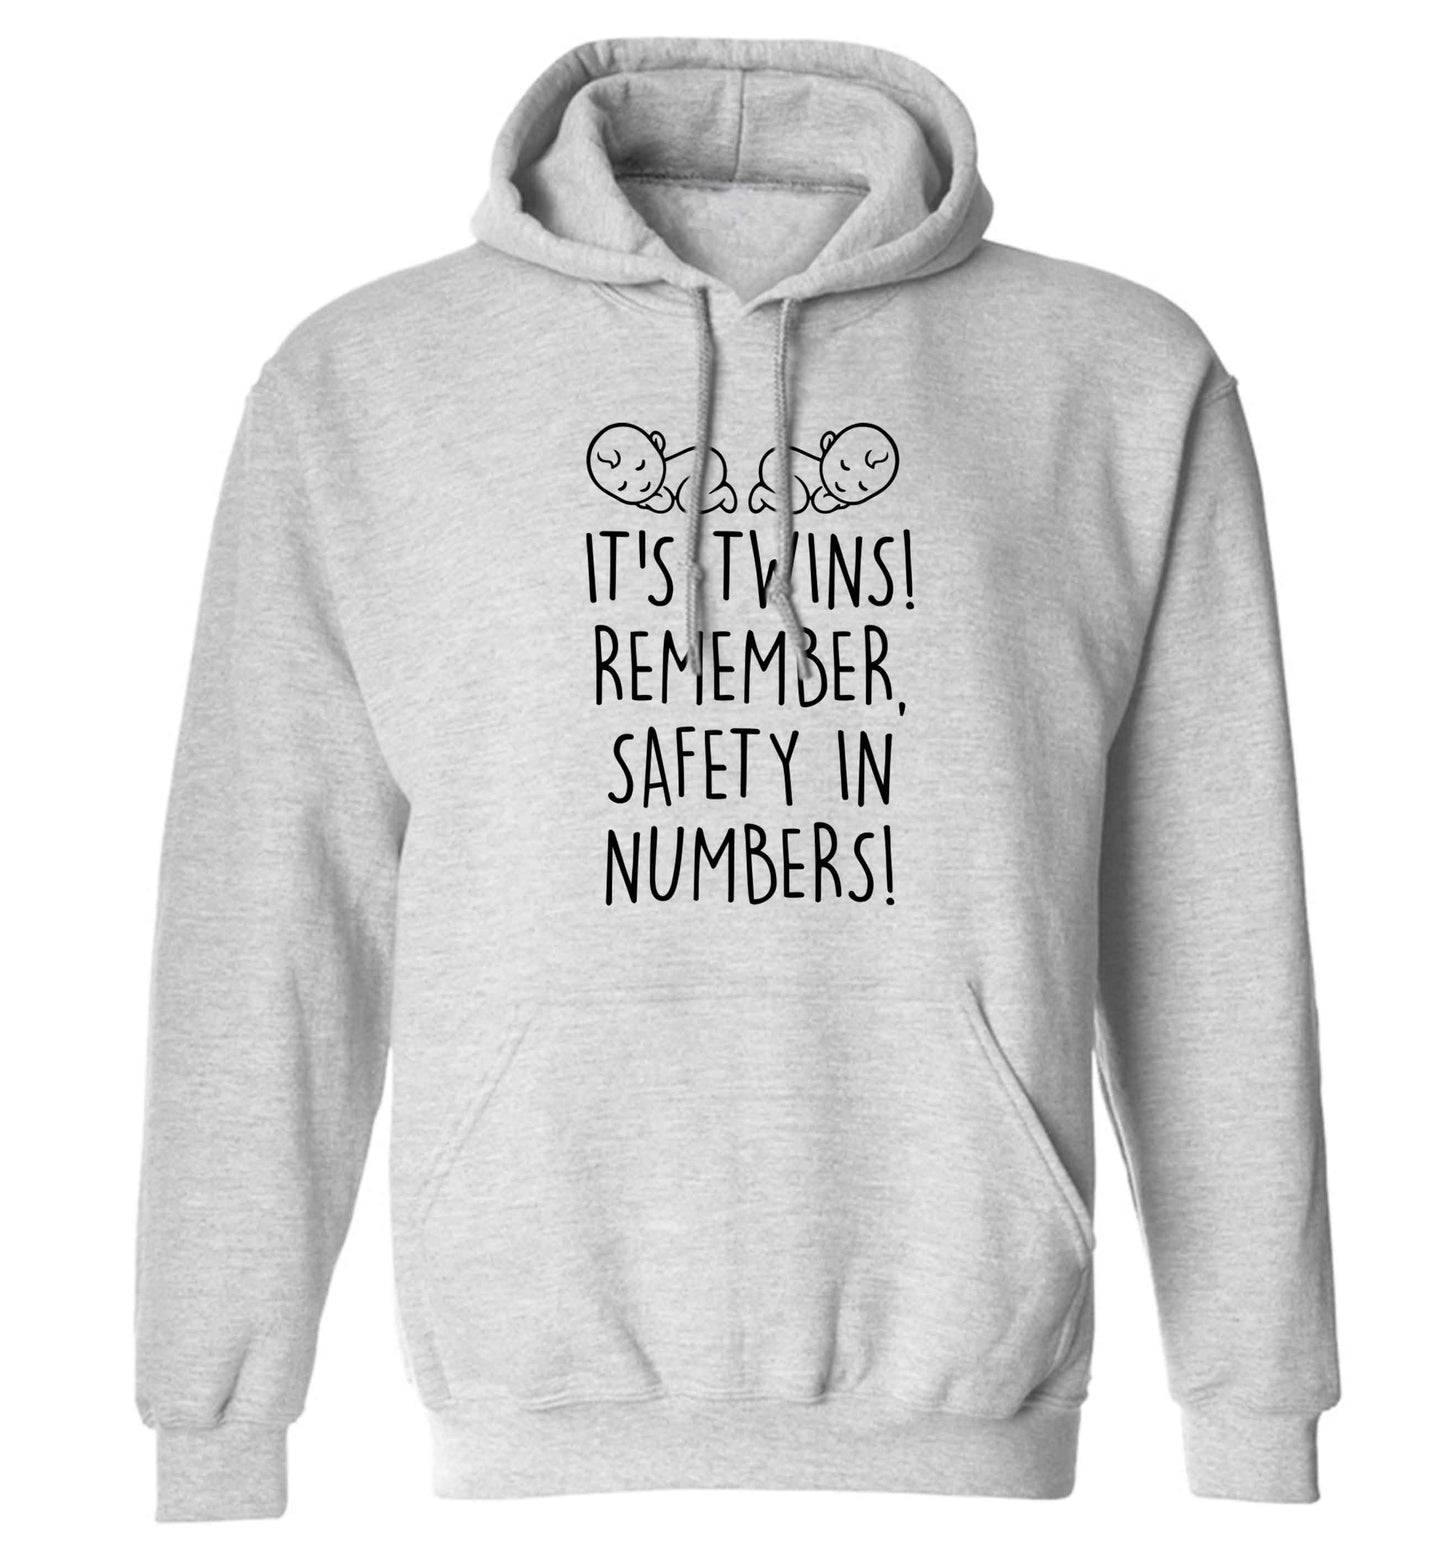 It's twins! Remember safety in numbers! adults unisex grey hoodie 2XL